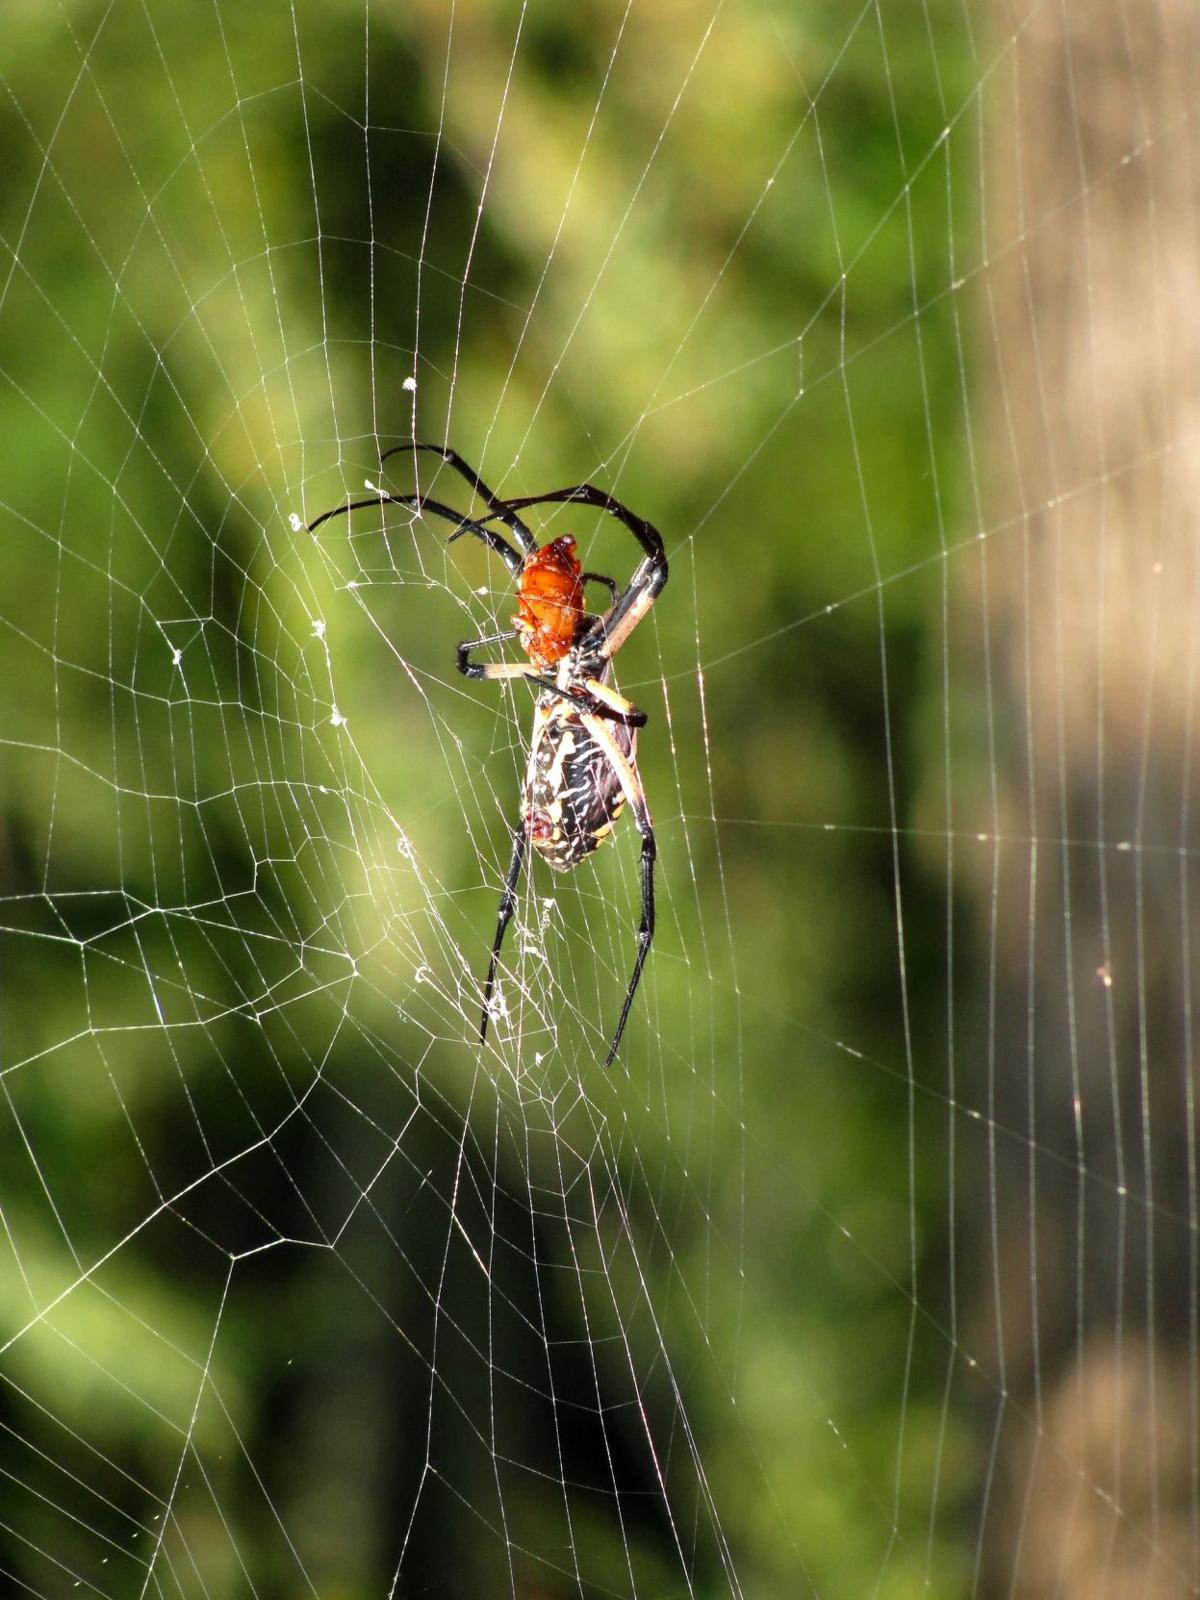 Spiders Help Keep Plant Feeding Insects Under Control